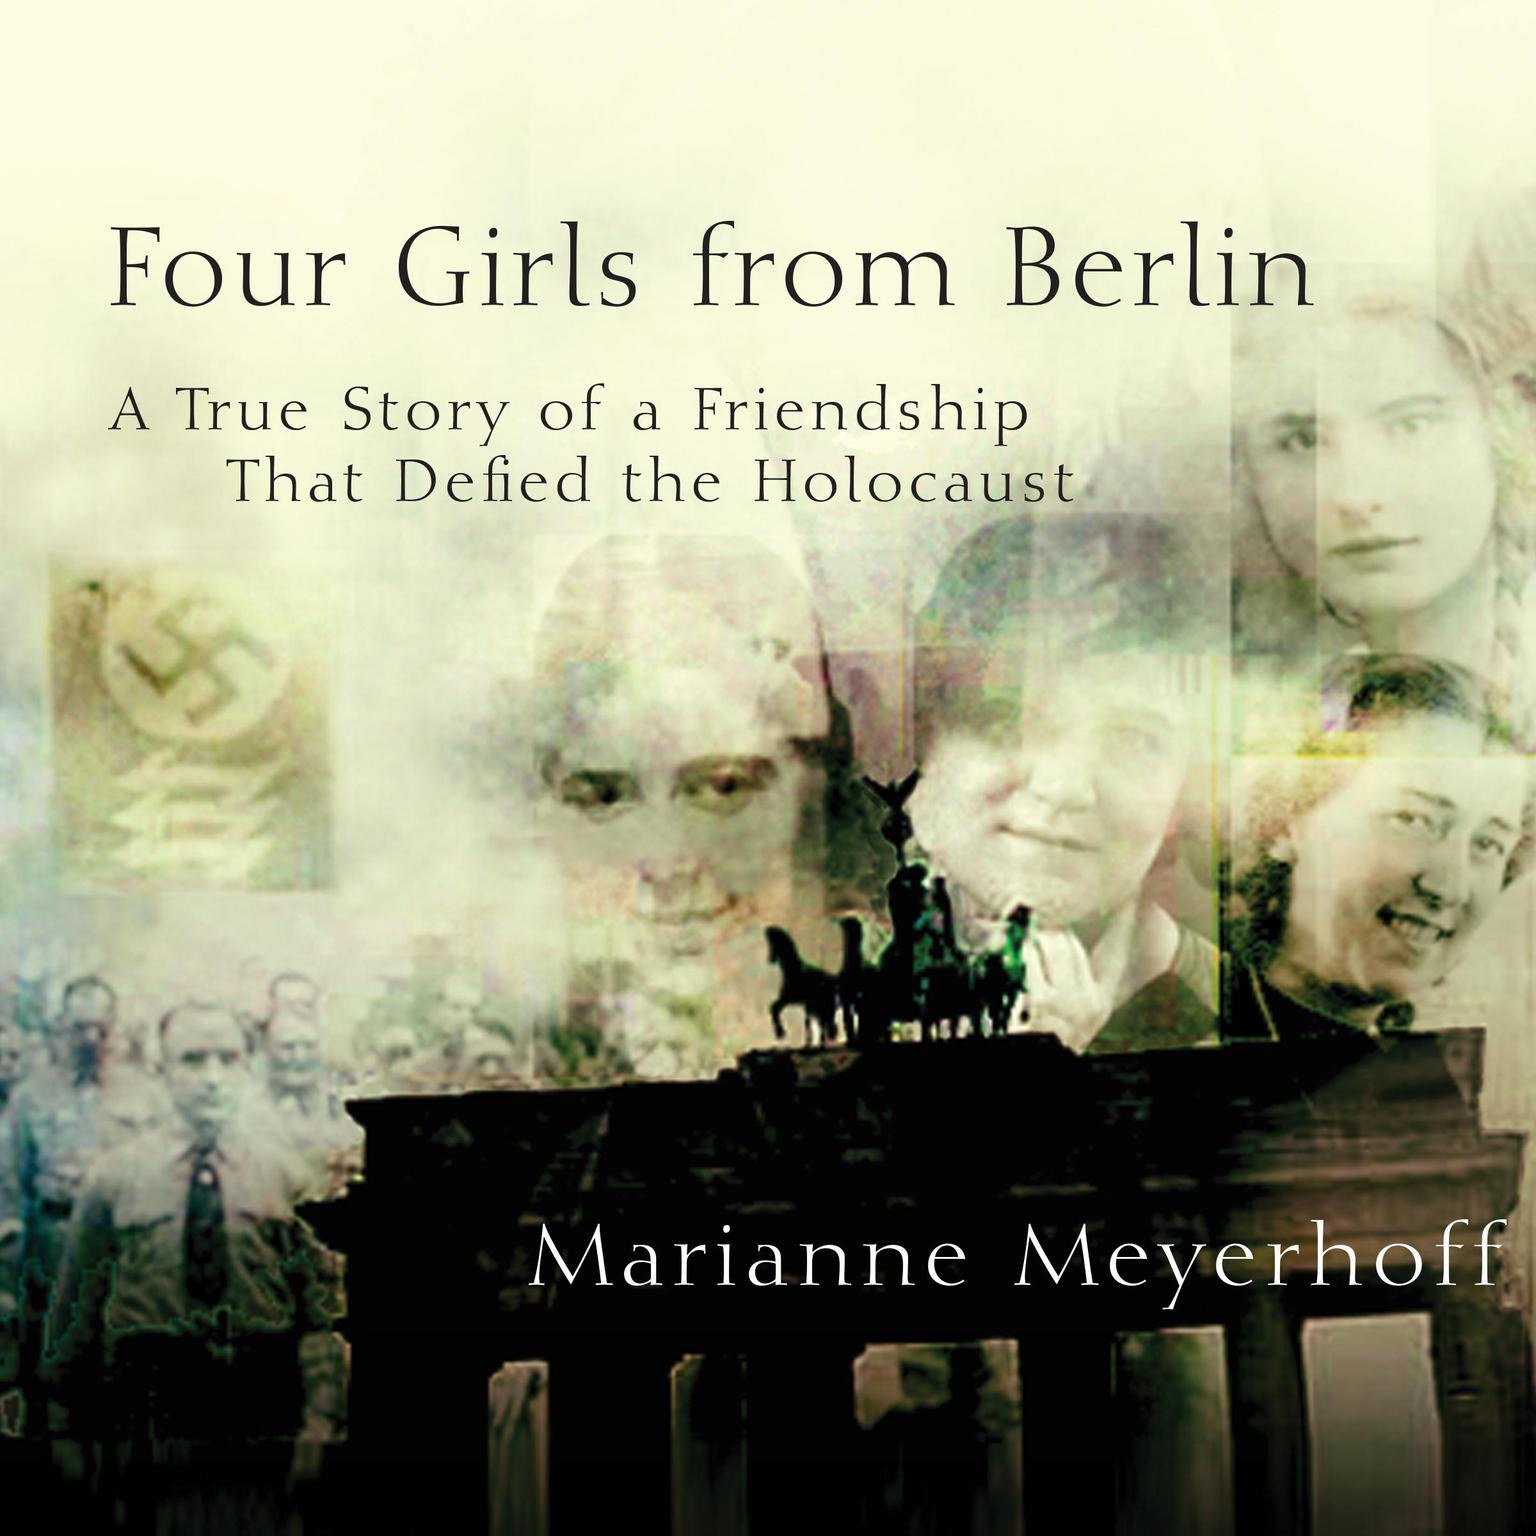 Four Girls From Berlin: A True Story of a Friendship That Defied the Holocaust Audiobook, by Marianne Meyerhoff